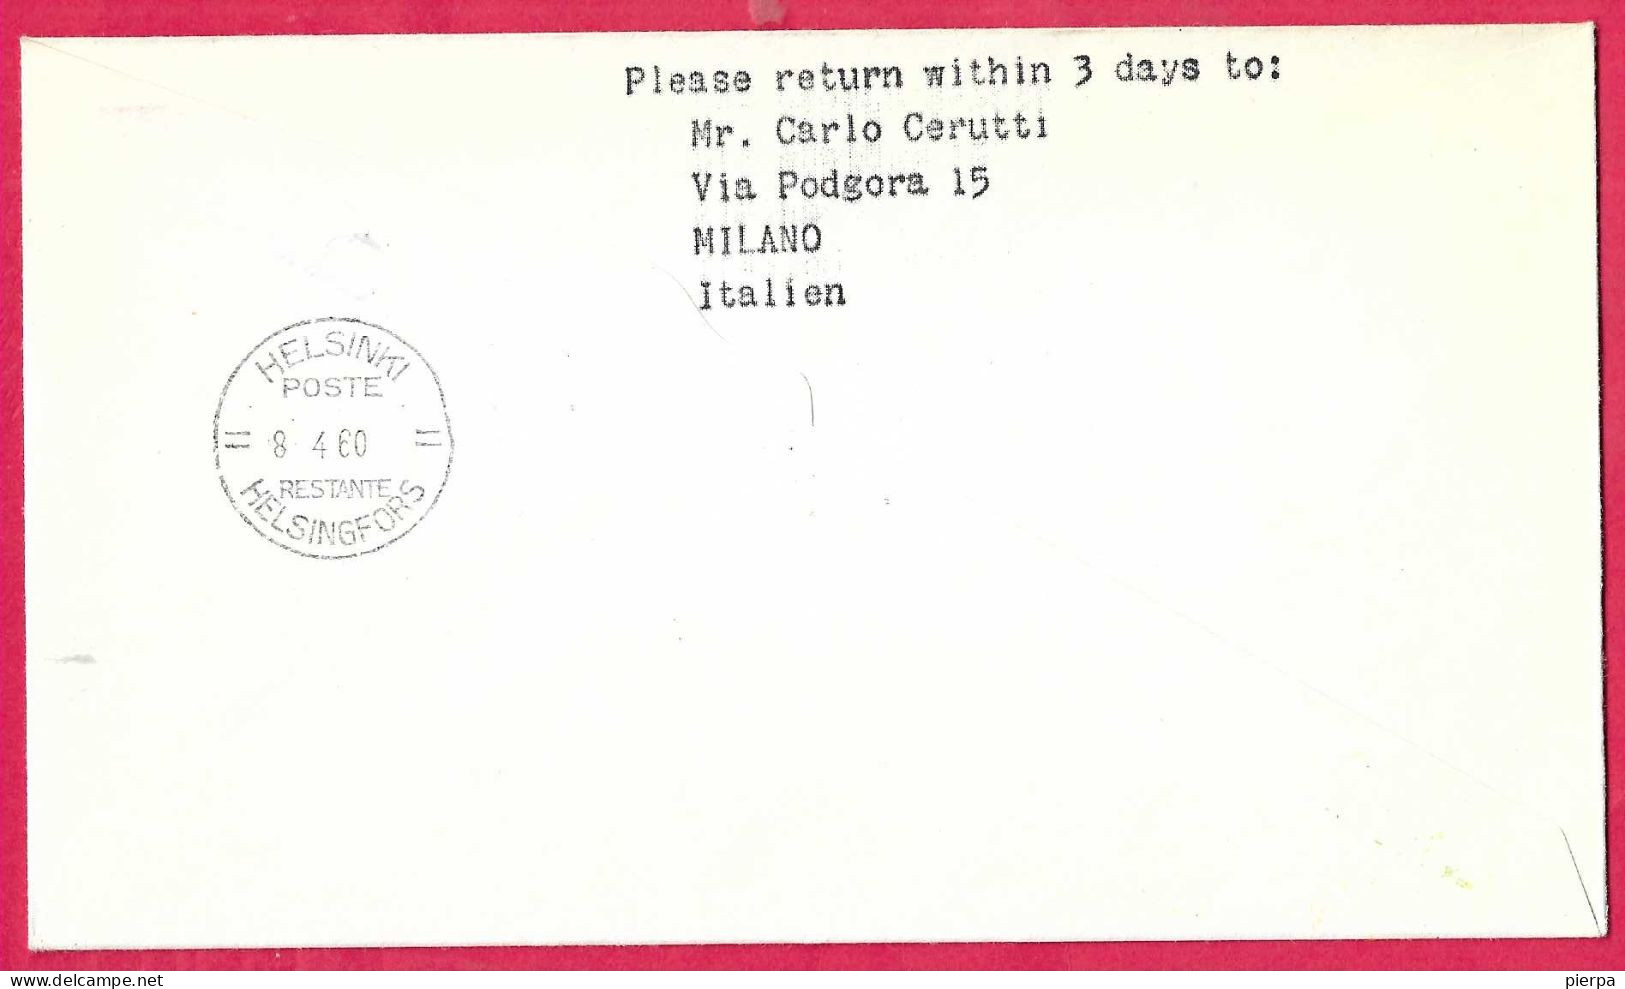 SVERIGE - FIRST FLIGHT FINNAIR WITH CARAVELLE FROM STOCKHOLM TO HELSINKI *1.4.60* ON OFFICIAL COVER - Storia Postale